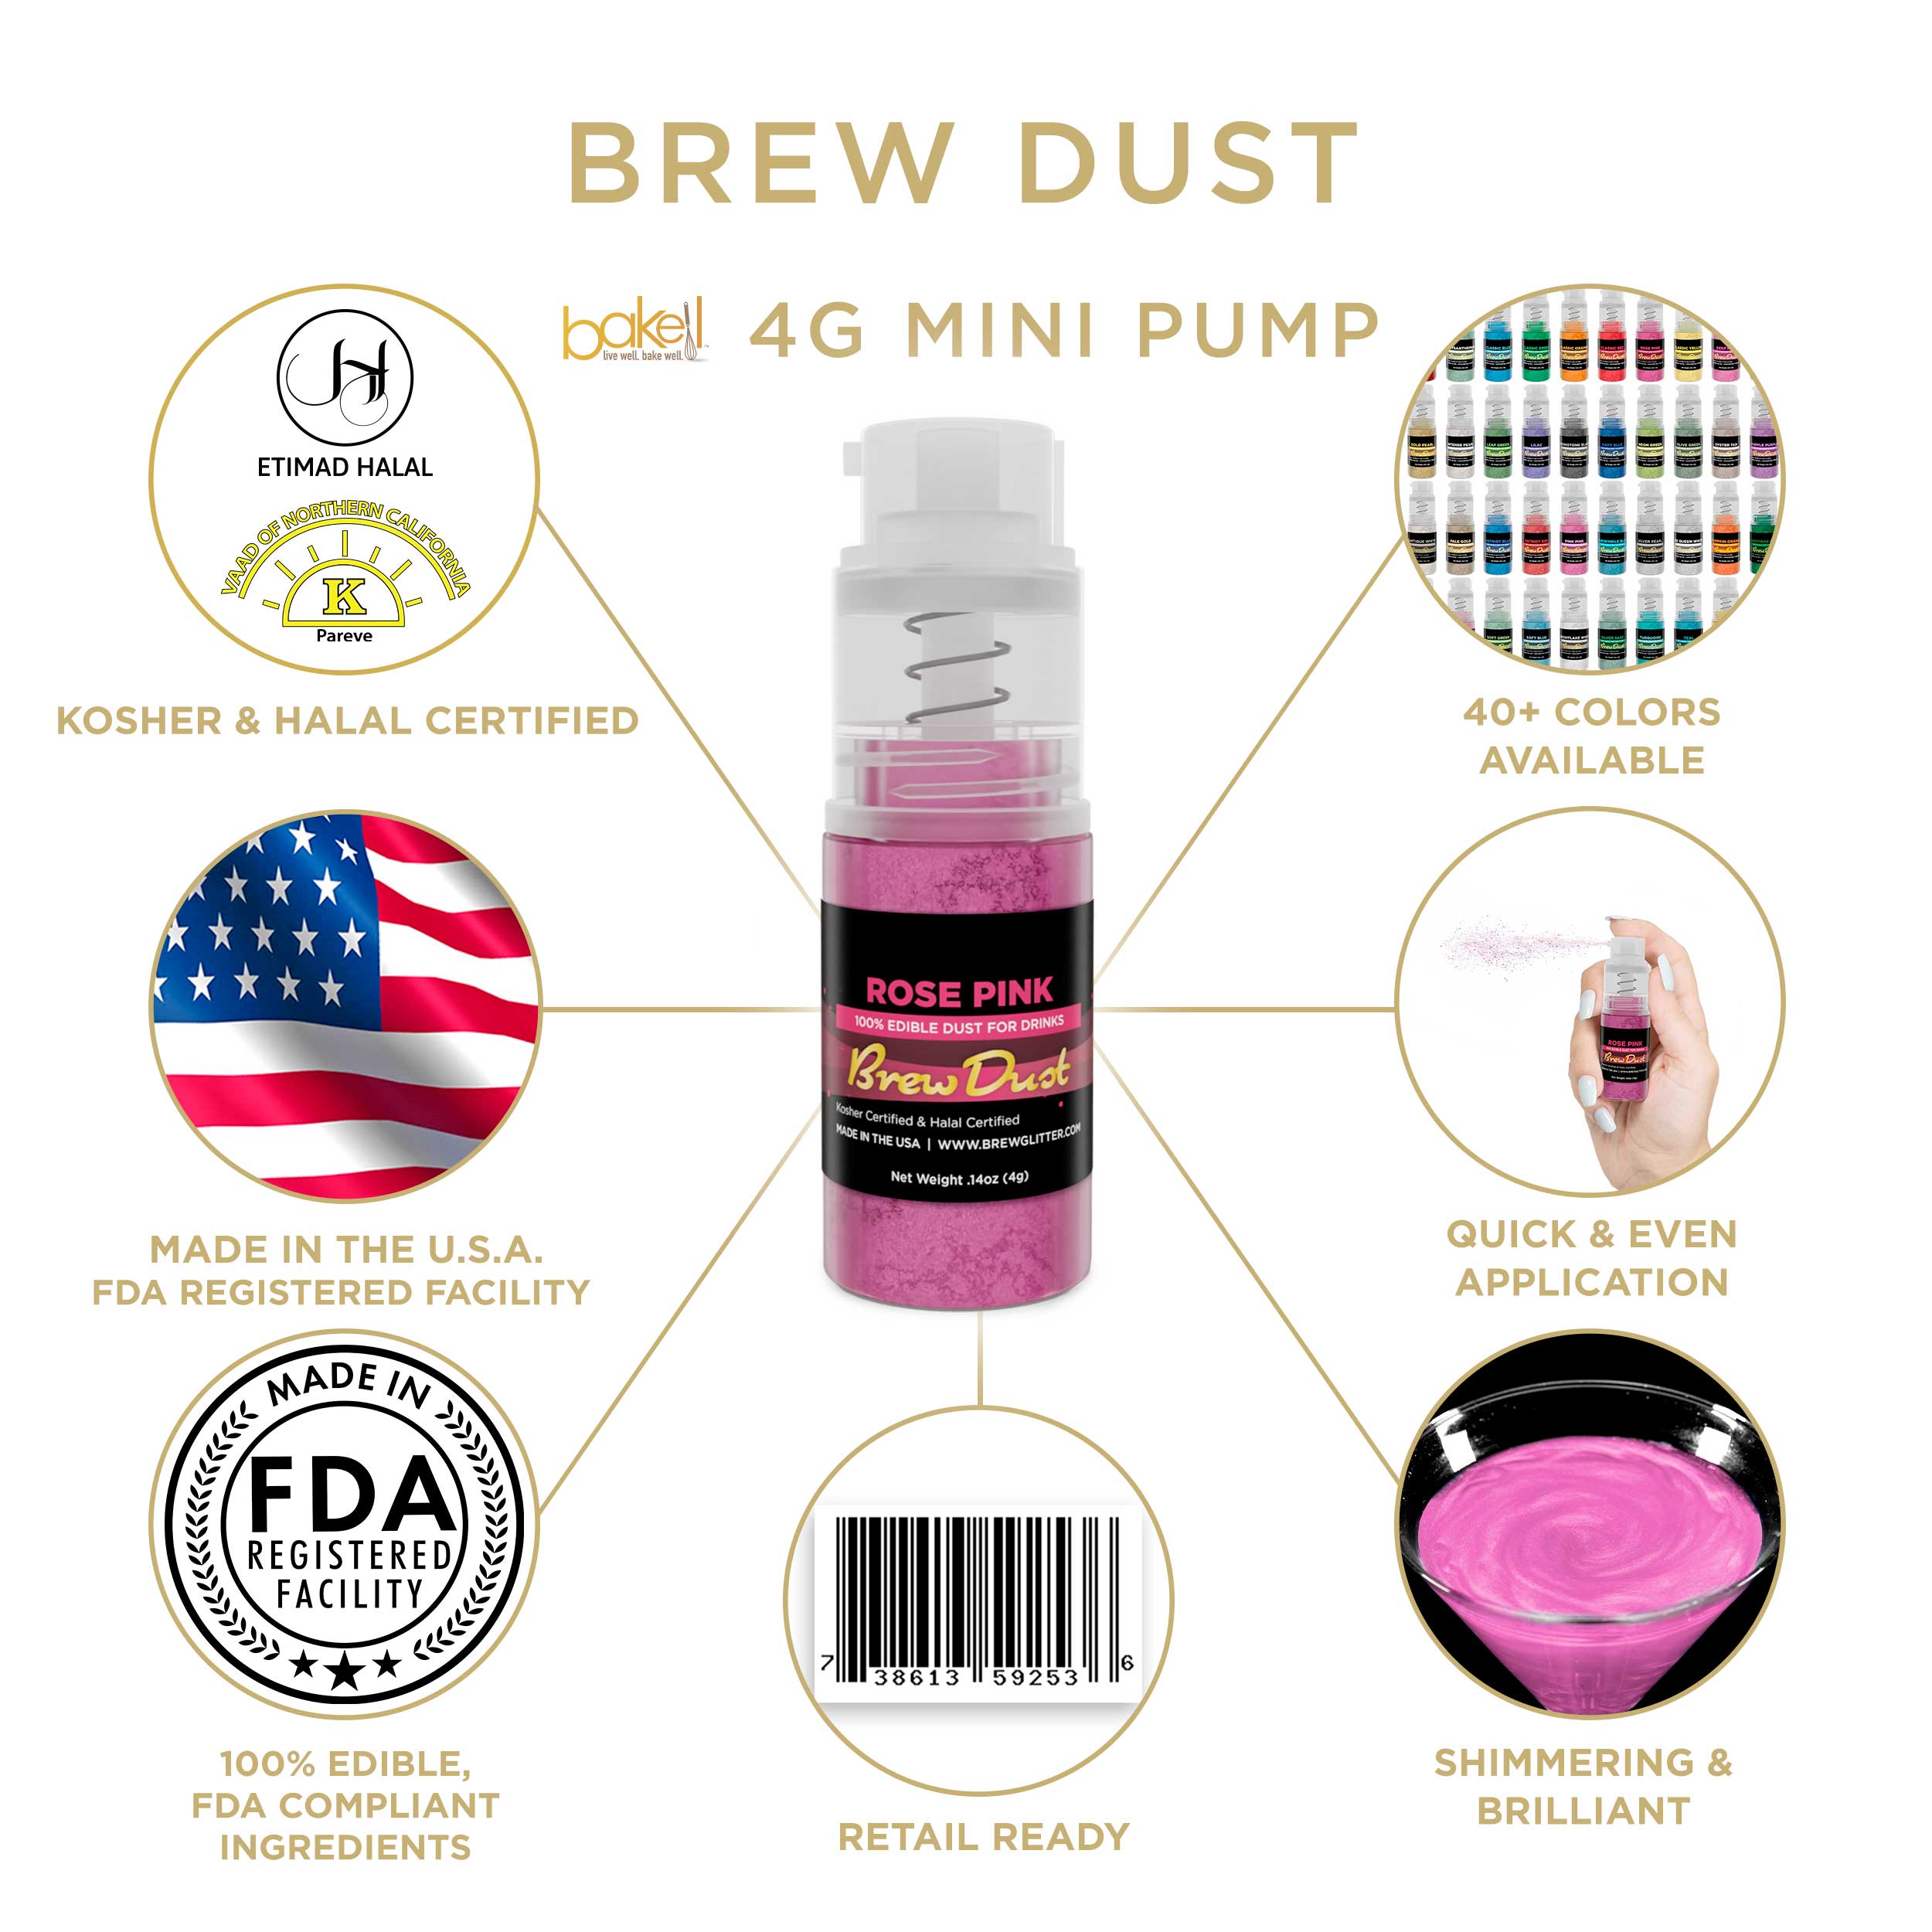 Rose Pink Brew Dust Miniature Spray Pump | Infographic and Information